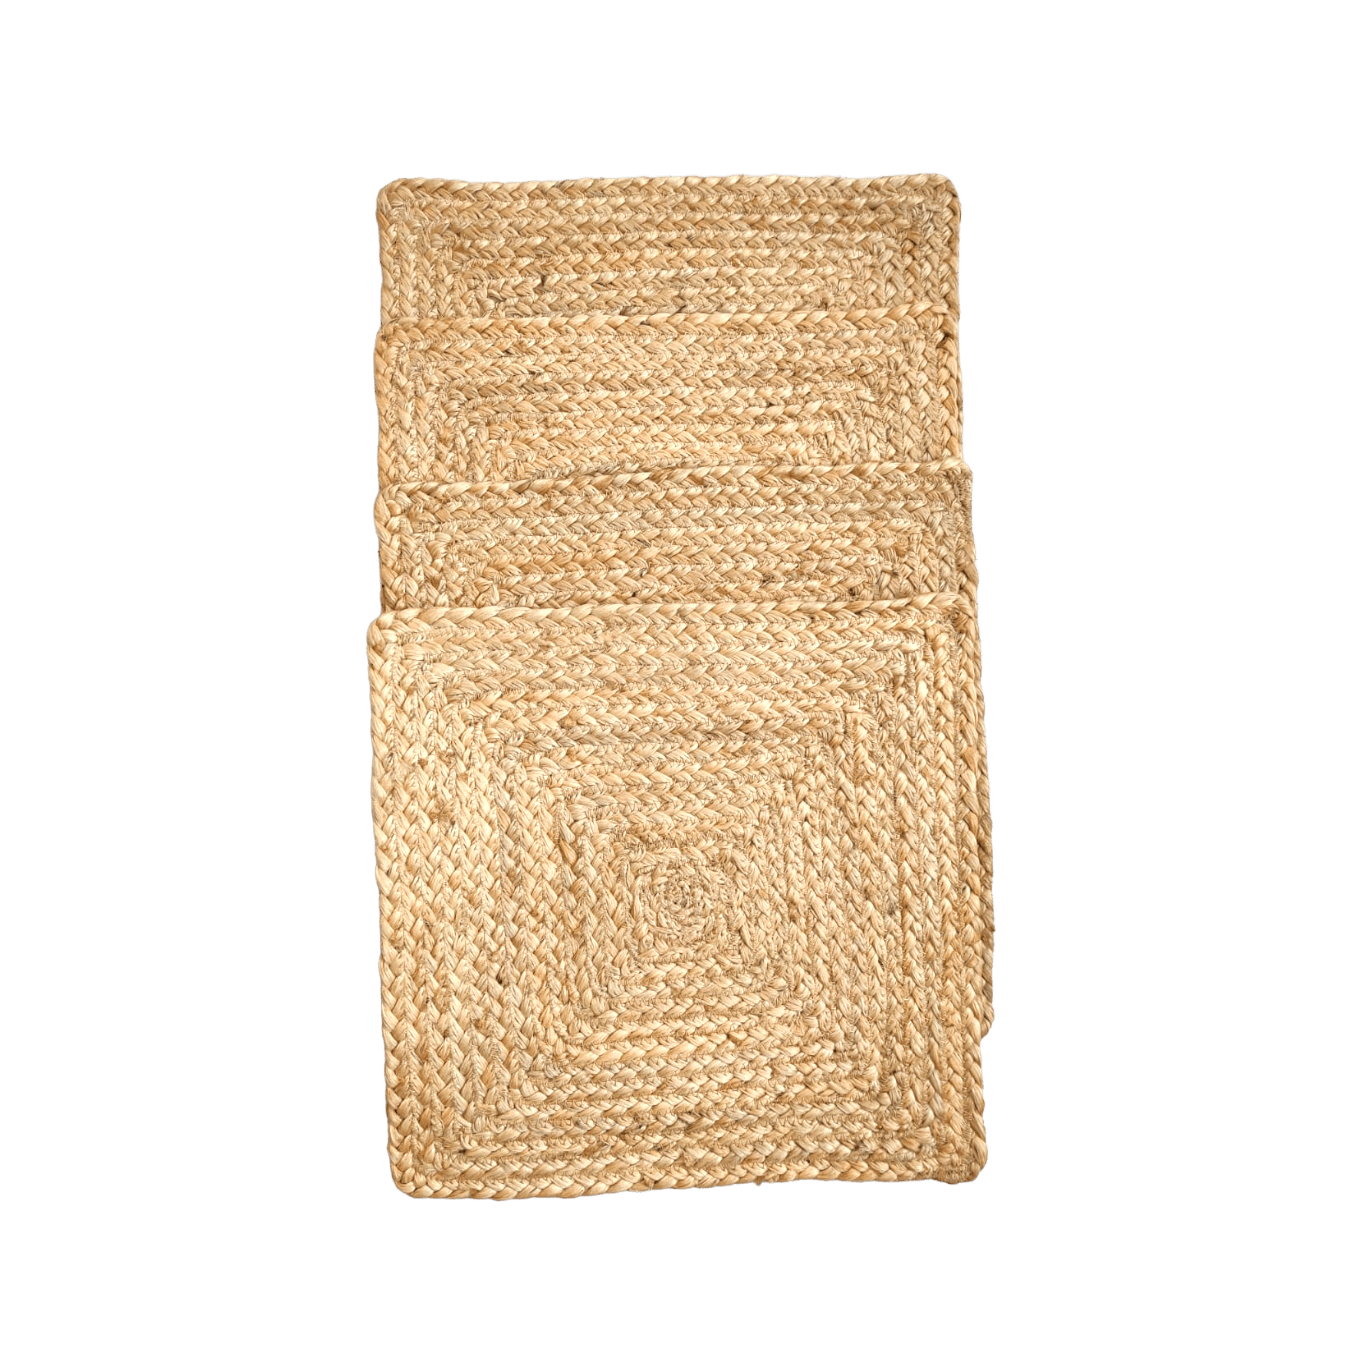 Natural Braided Jute Square Placemat - Set of 10 - MAIA HOMES